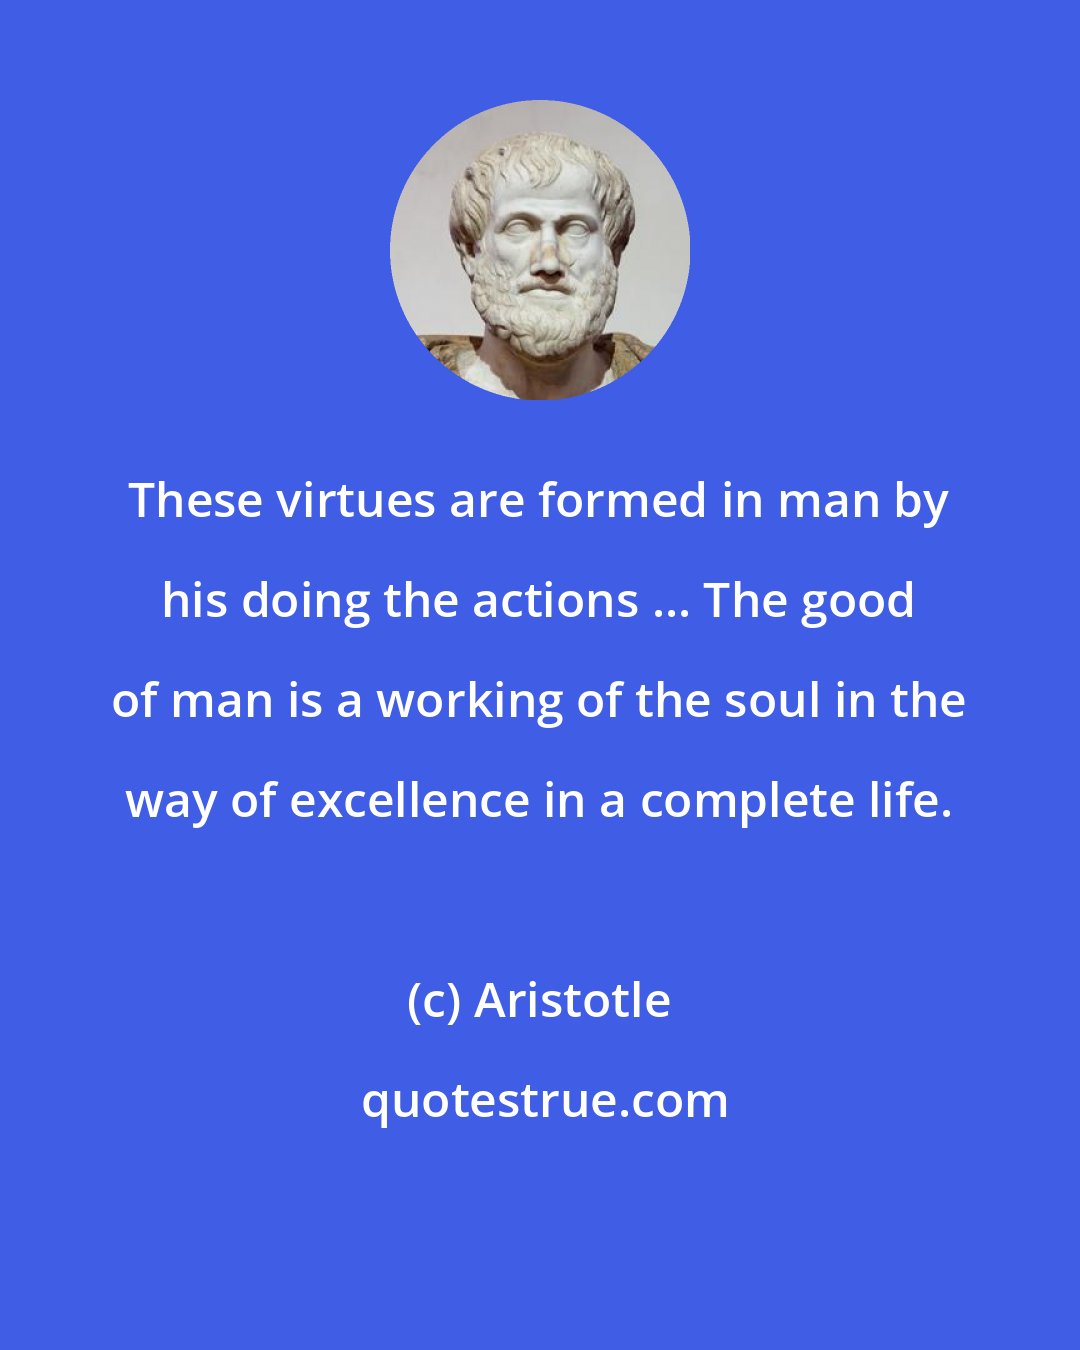 Aristotle: These virtues are formed in man by his doing the actions ... The good of man is a working of the soul in the way of excellence in a complete life.